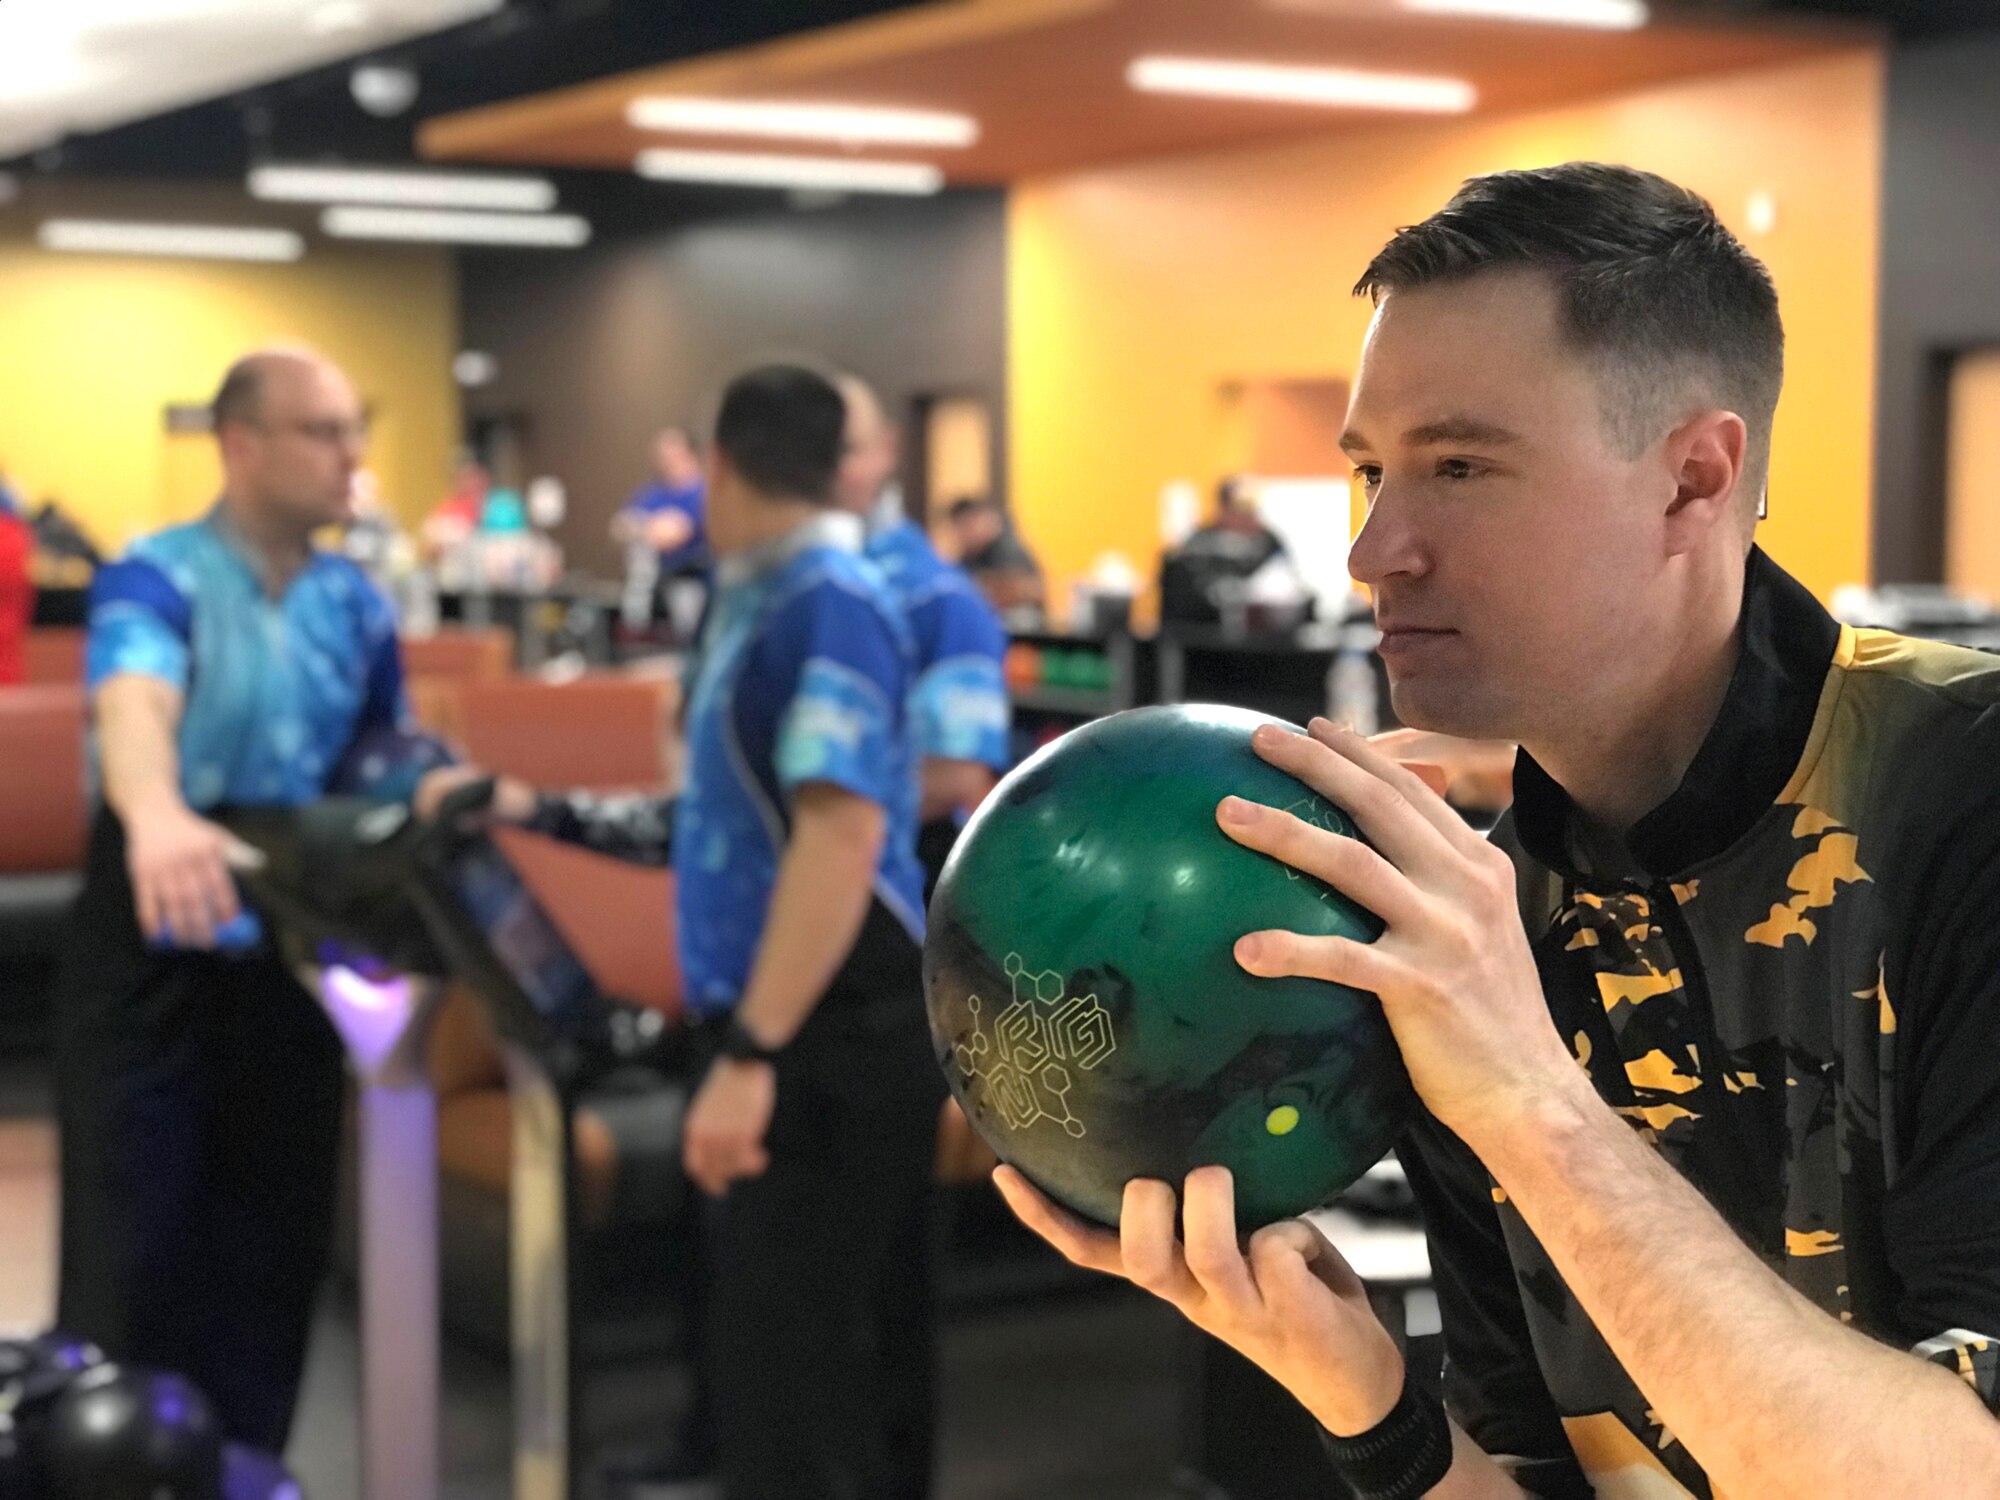 Staff Sgt. Chris Artebum of Joint Base Lewis-McChord, Wash. wins bronze in the 2018 Armed Forces Bowling Championship at Ten Strike Bowling Center at Fort Lee, Va. from 13-17 April. The annual tournament features doubles, mixed doubles, individuals and team challenges. (U.S. Navy Photo by Mass Communications Specialist 2nd Class Orlando Quintero/Released)